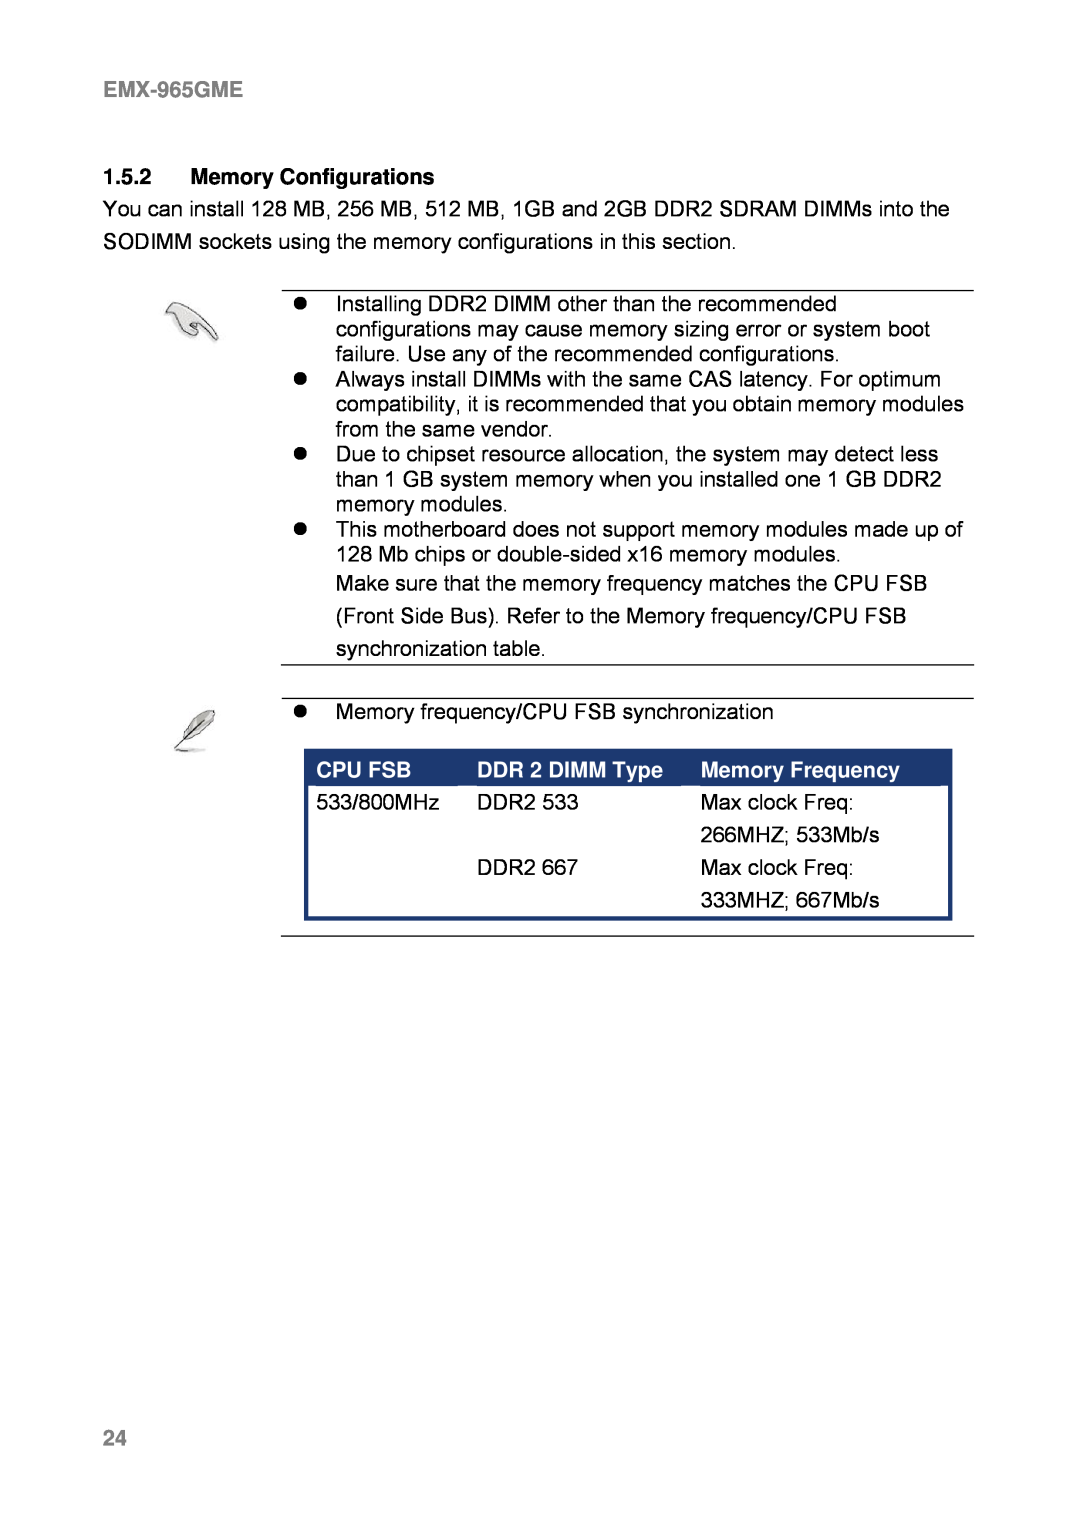 Intel EMX-965GME user manual 1.5.2Memory Configurations, Cpu Fsb, DDR 2 DIMM Type, Memory Frequency 